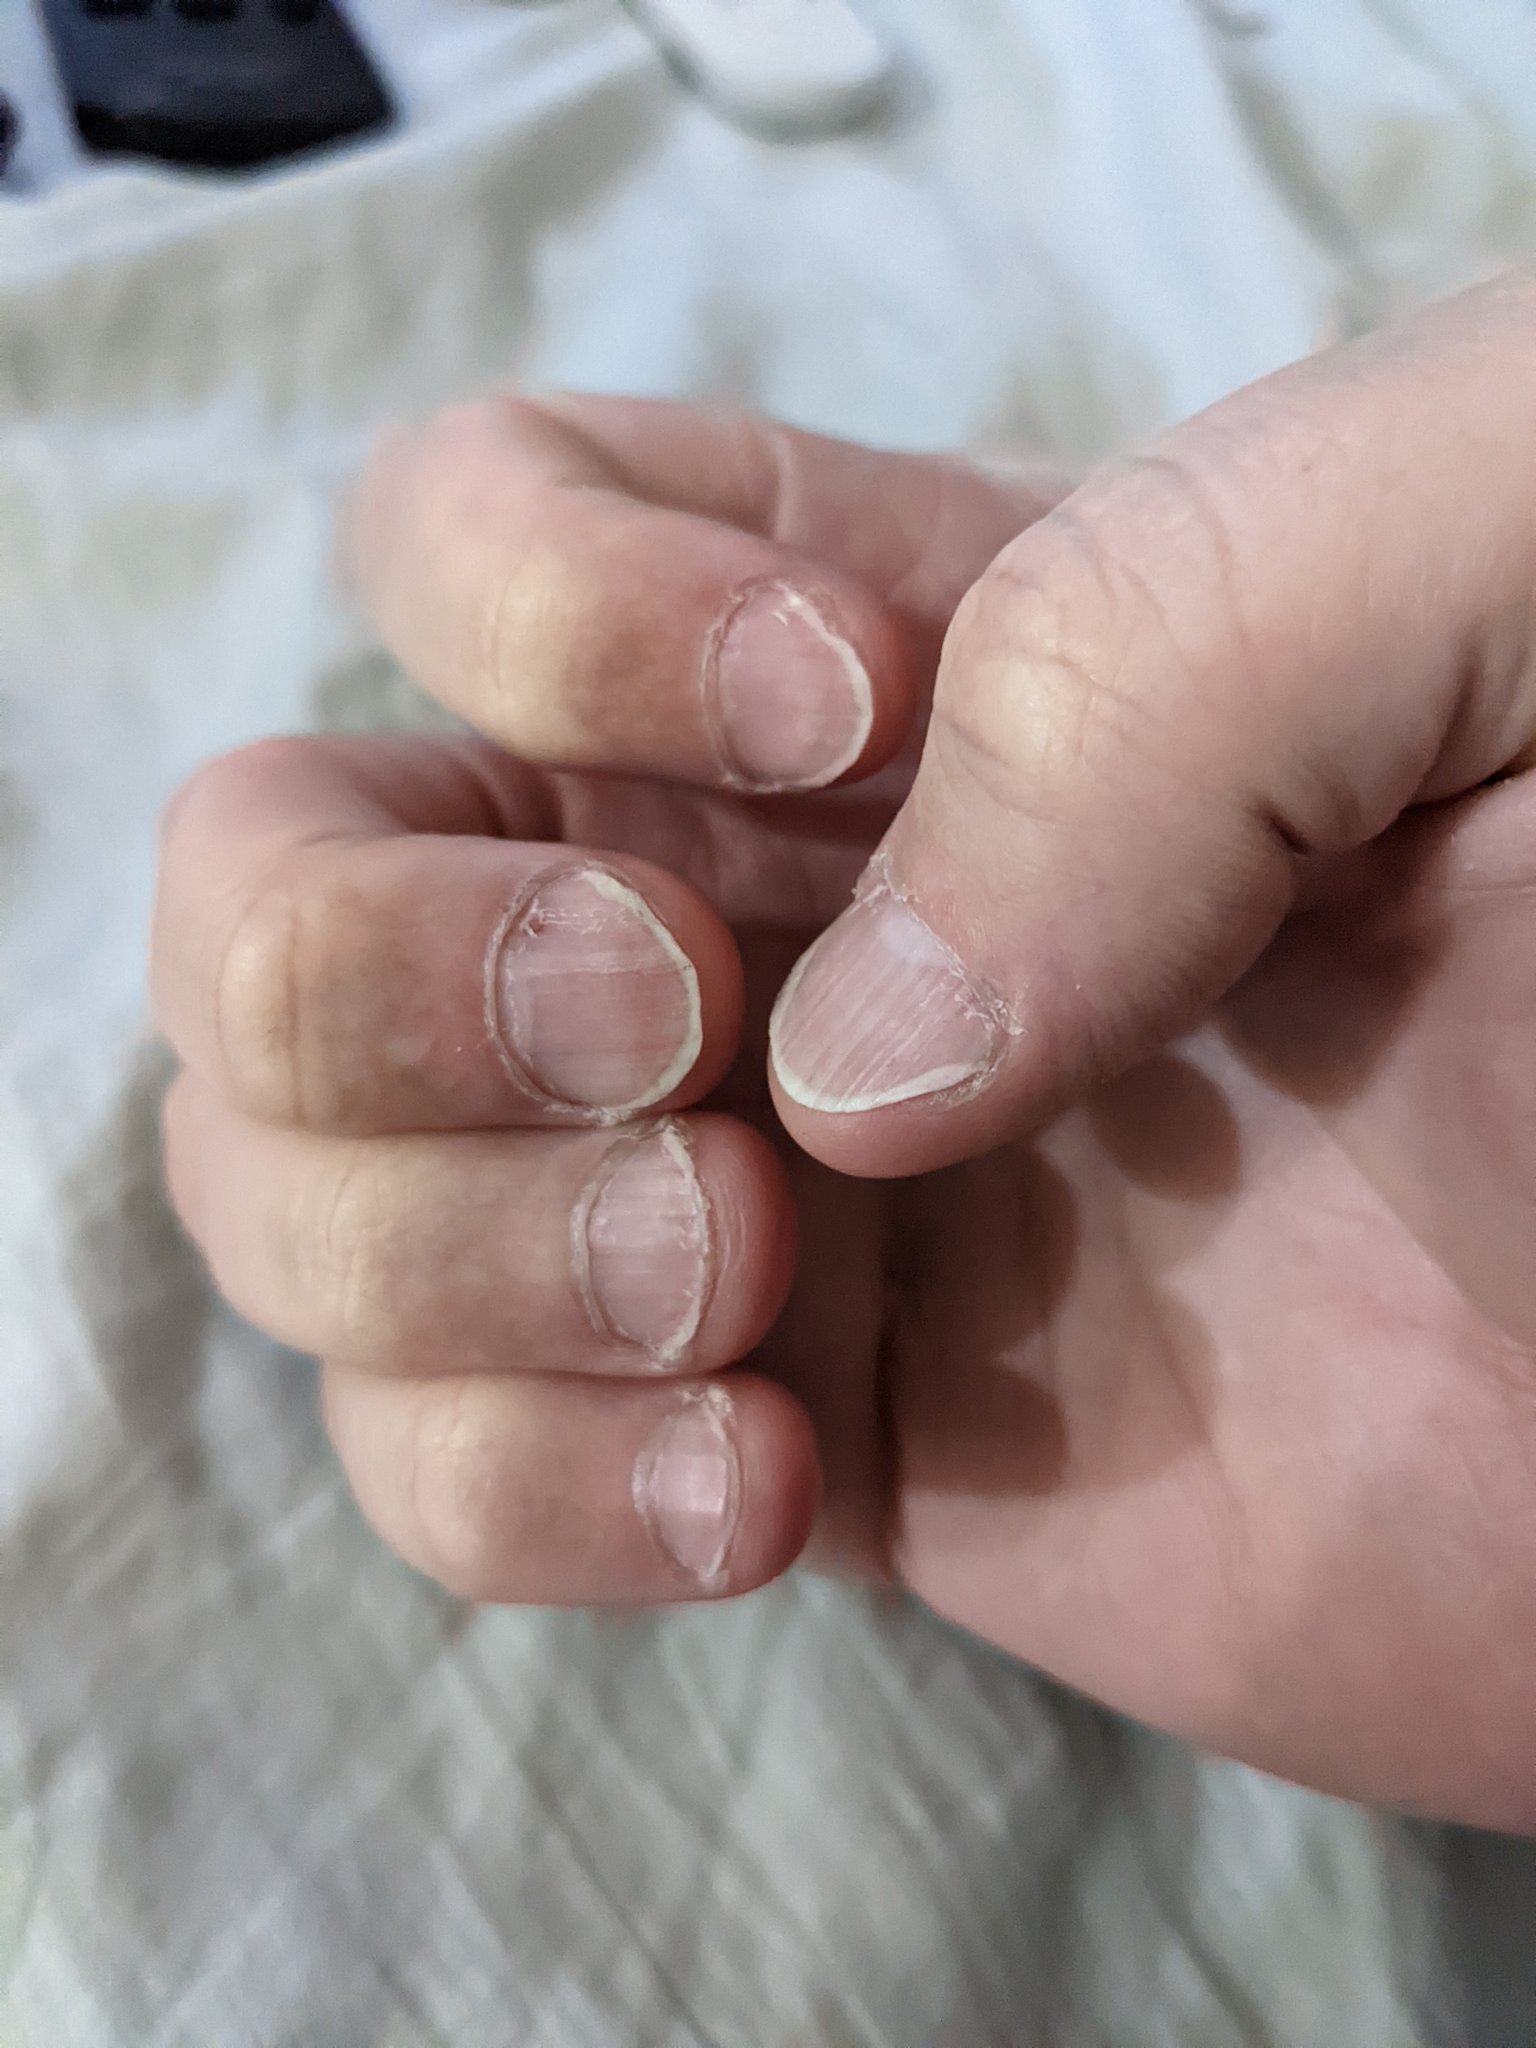 The Ultimate Guide To Onychophagia: Is Nail Biting Self Harm? - Dr. Ori